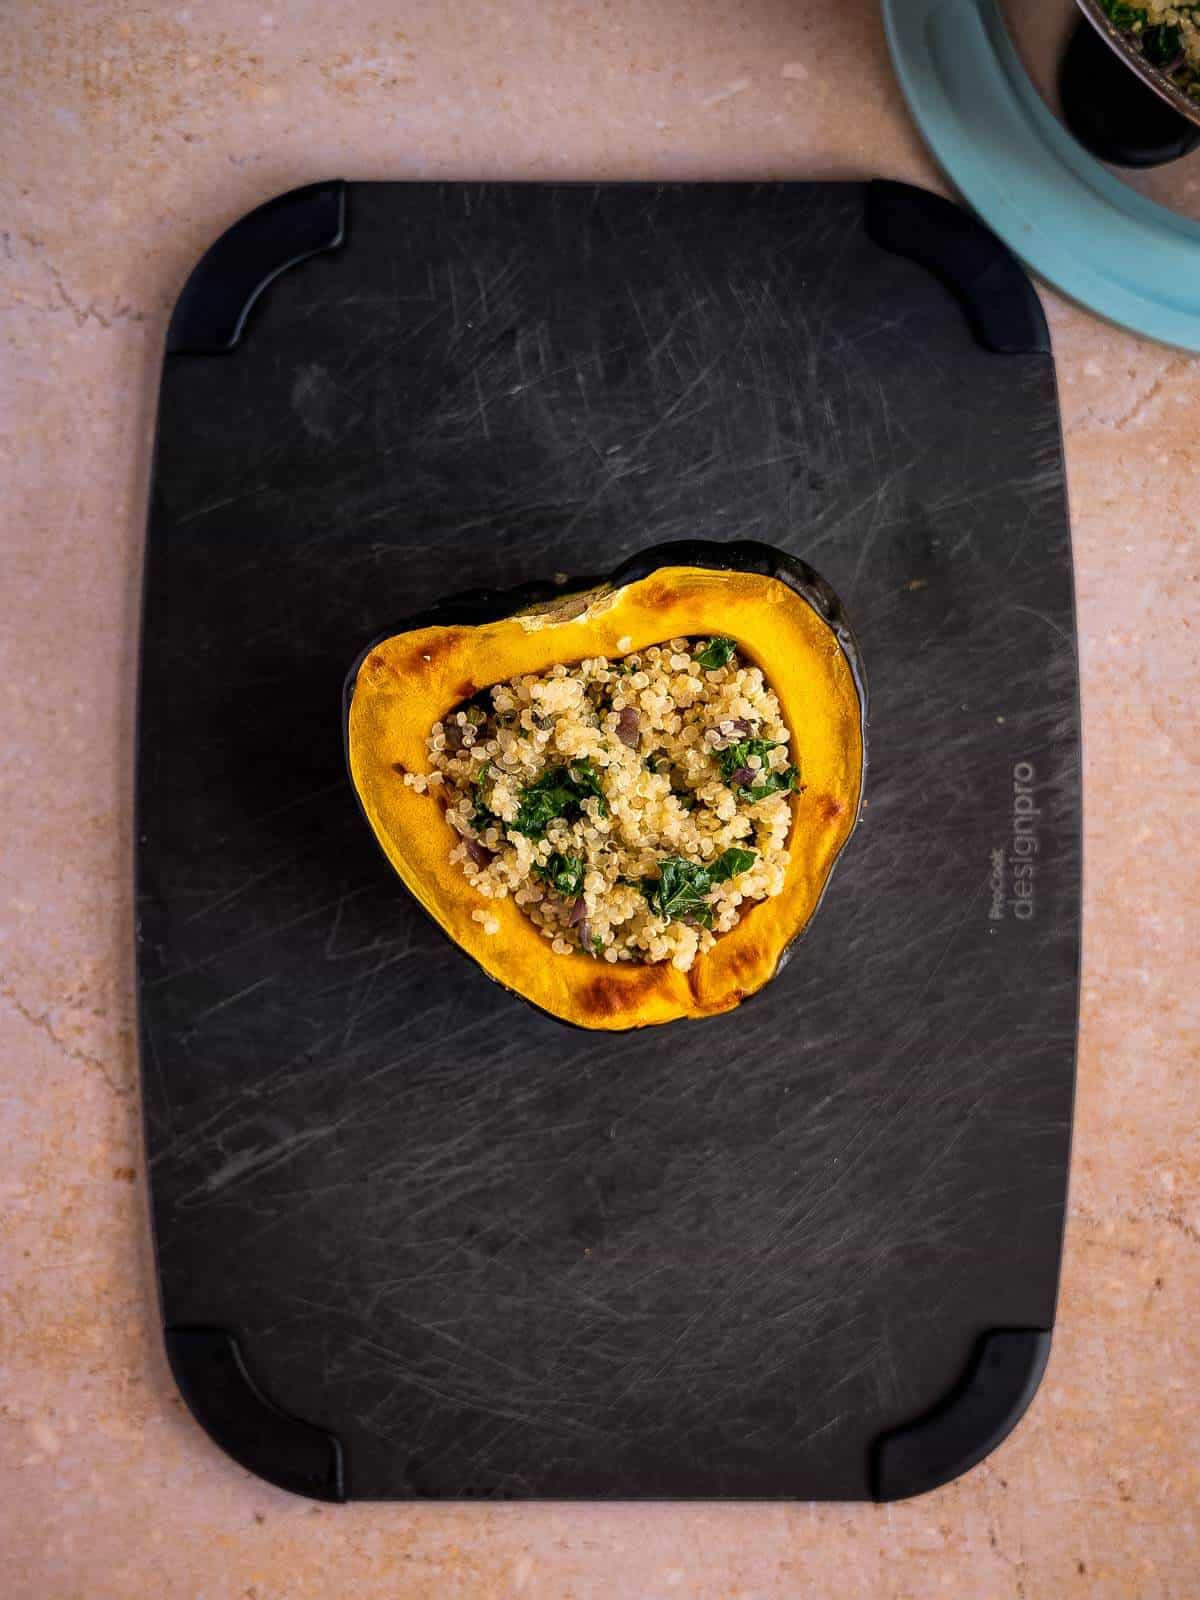 stuff the cooked acorn squash with the quinoa mixture.